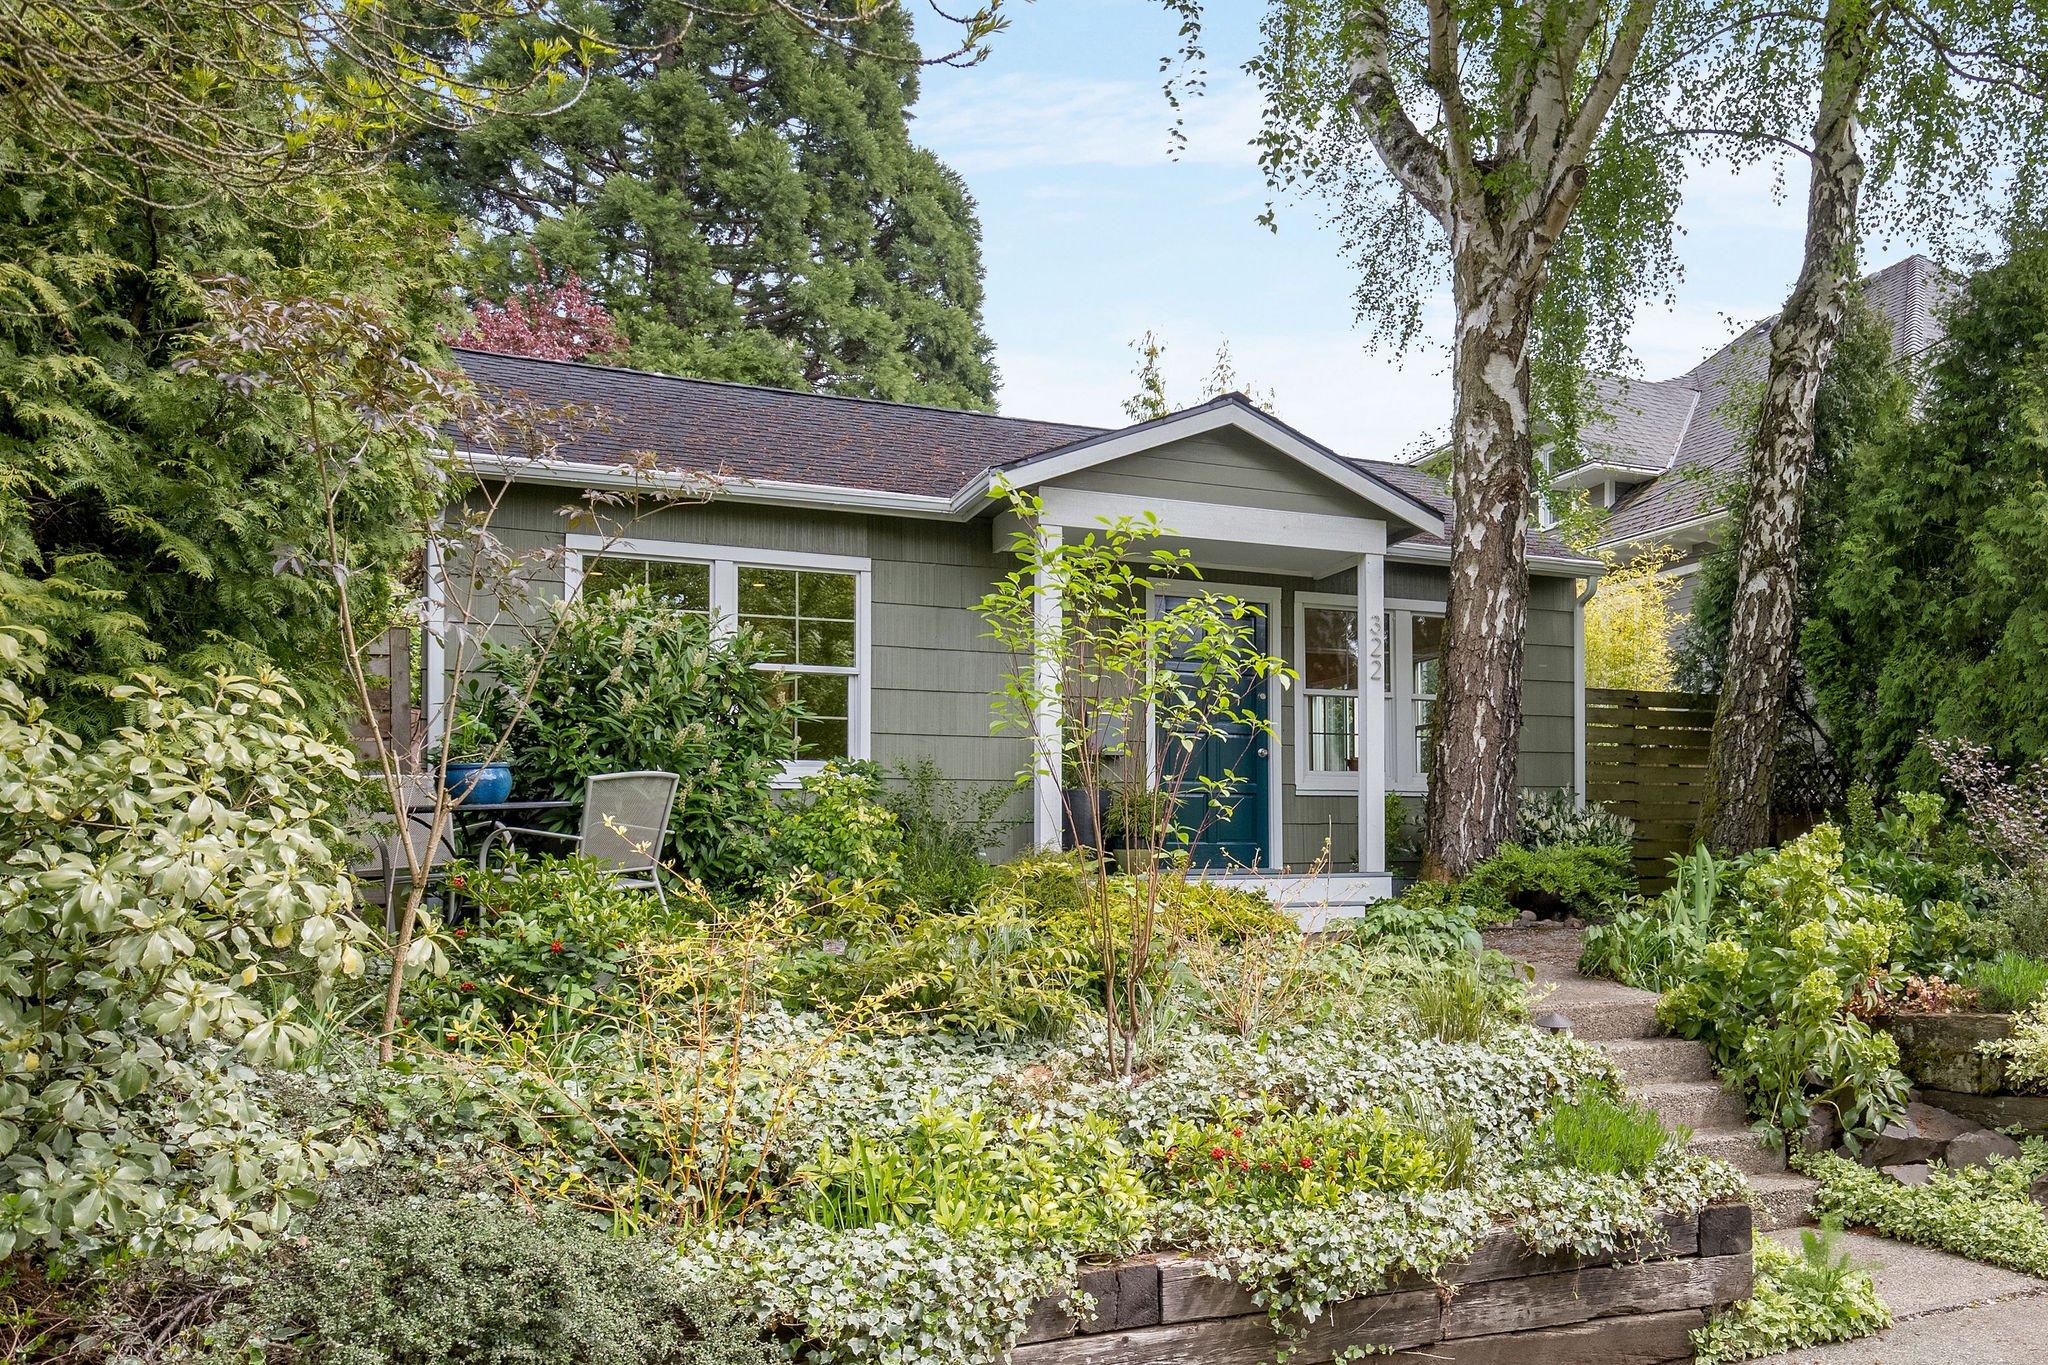  image description: exterior of green one story cottage with garden and yard 